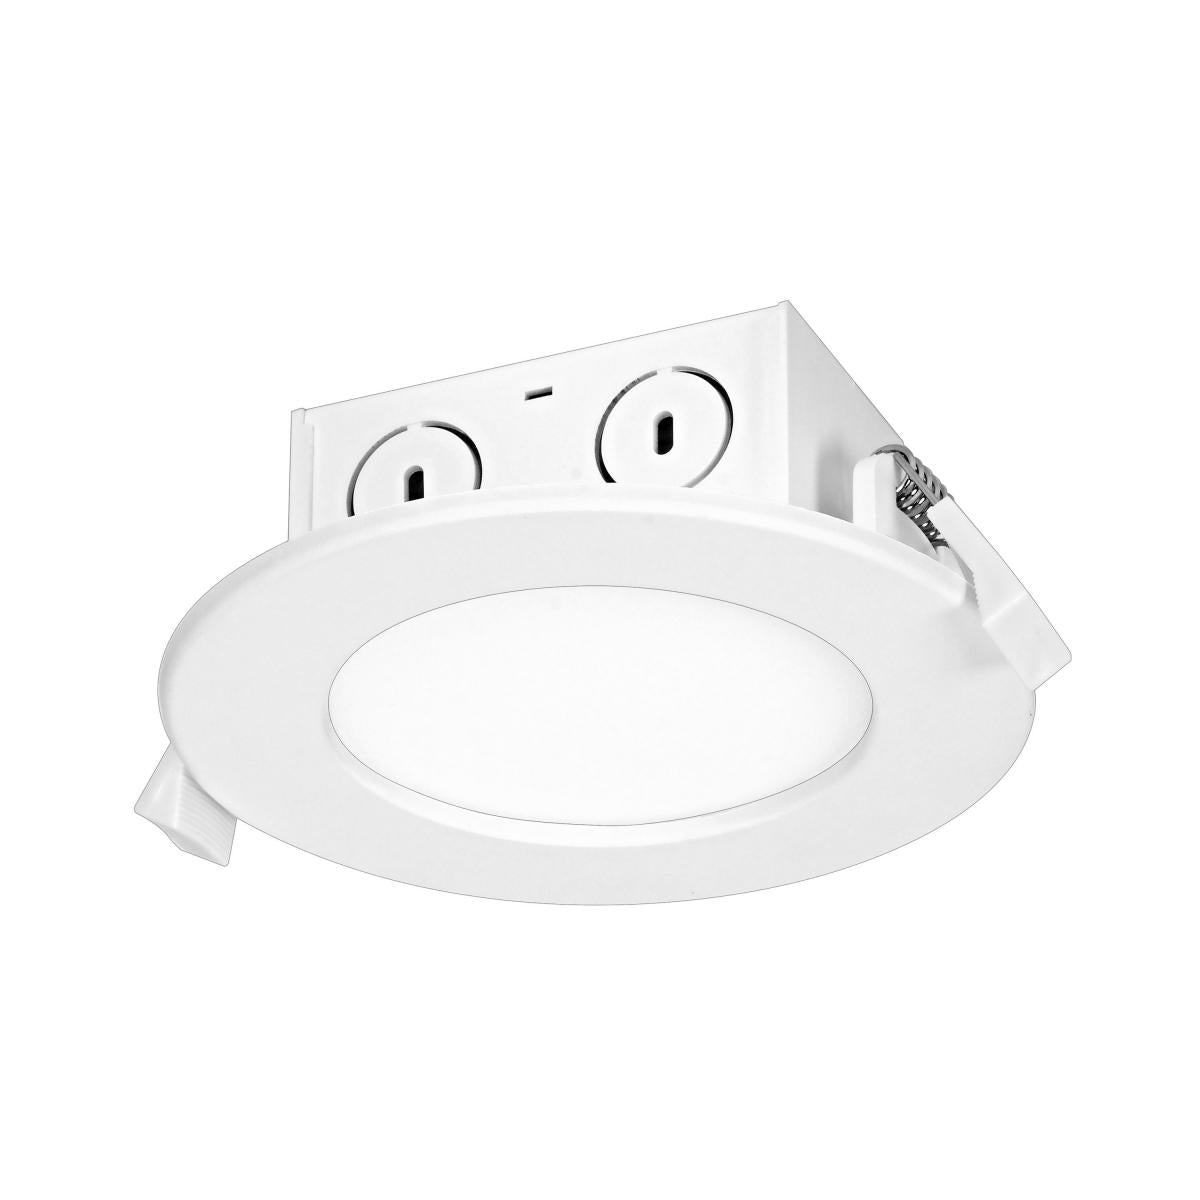 Satco S39057 8.5 watt LED Direct Wire Downlight Edge-lit 4 inch 4000K 120 volt Dimmable